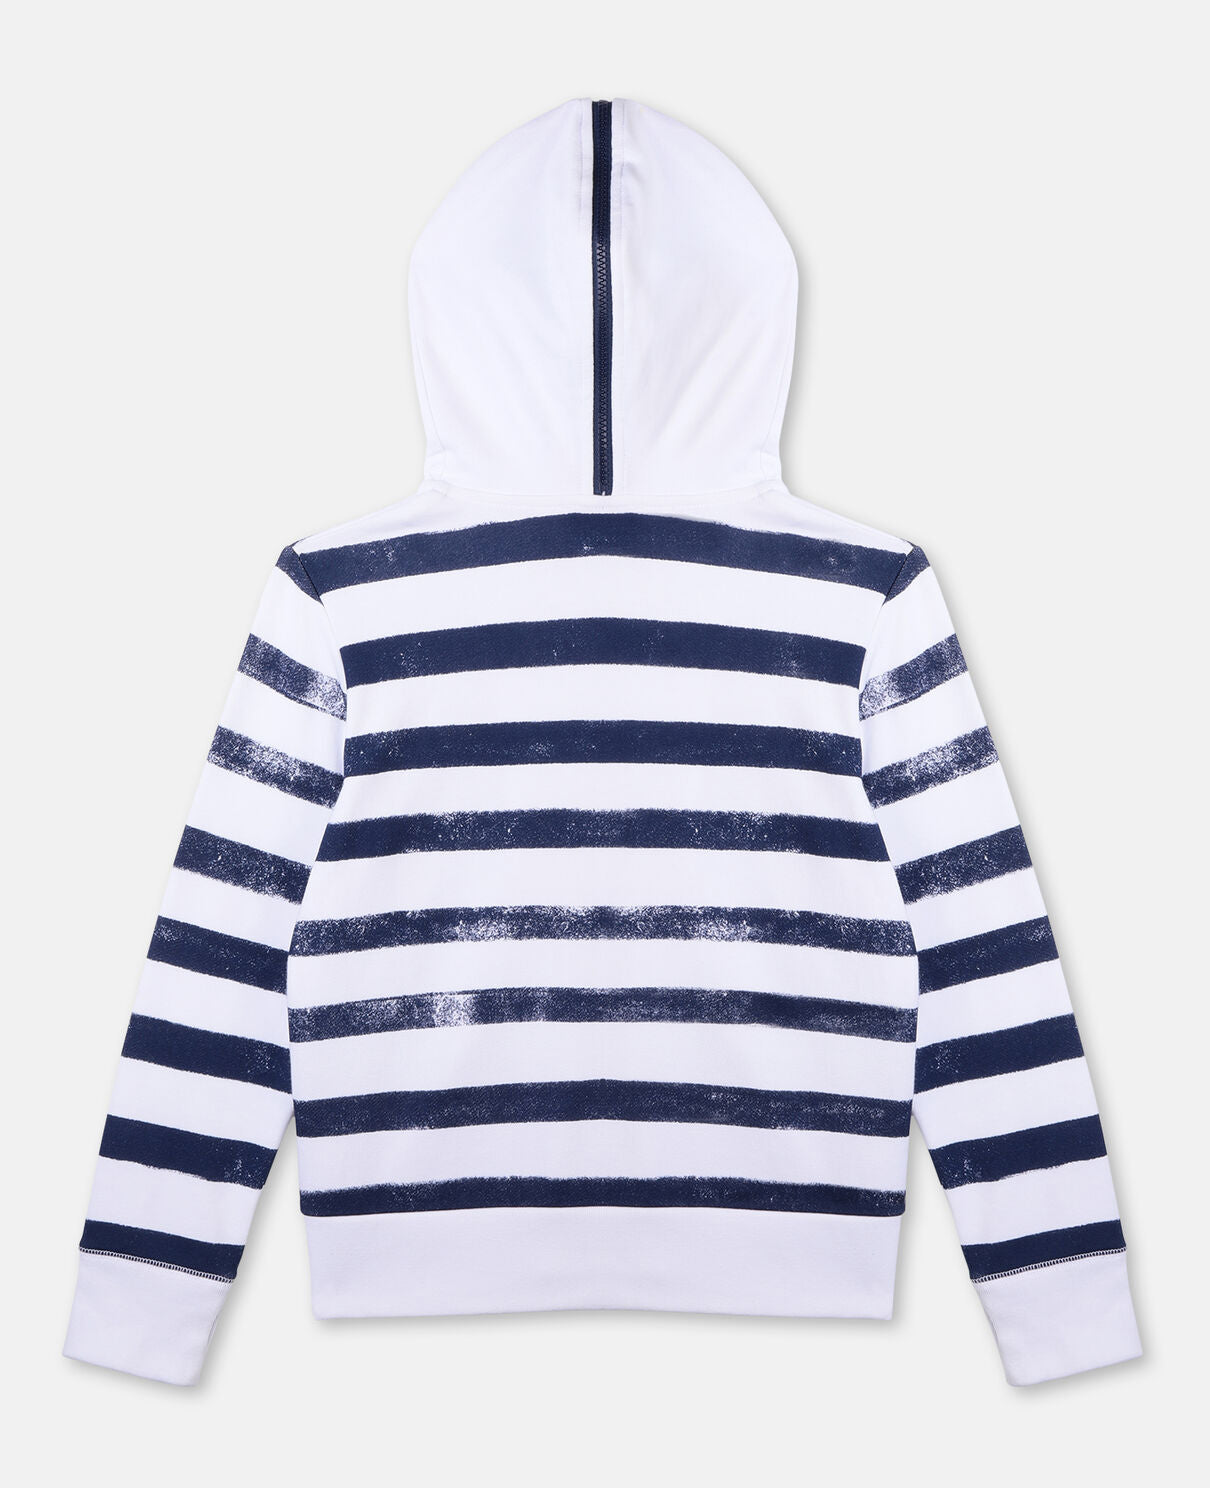 Pirate Cotton Hoodie